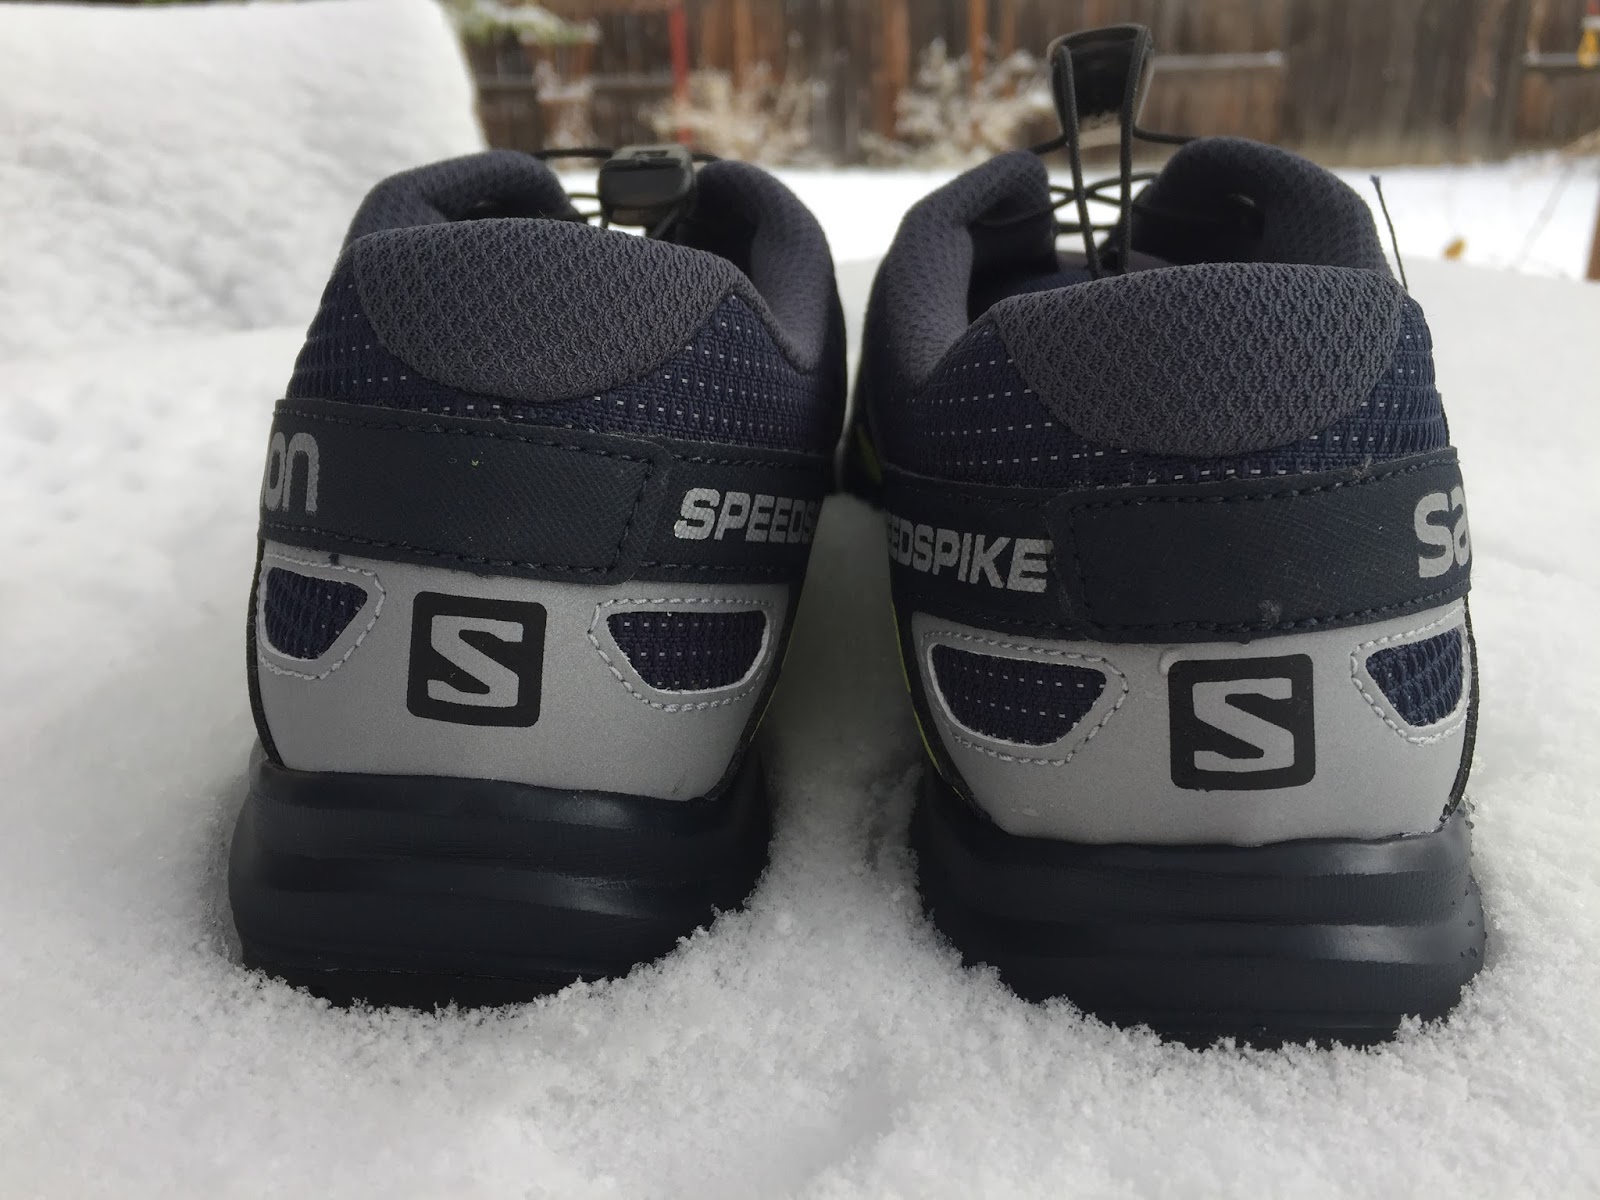 Road Run: Salomon CS Review: For snowy, icy, slippery conditions.